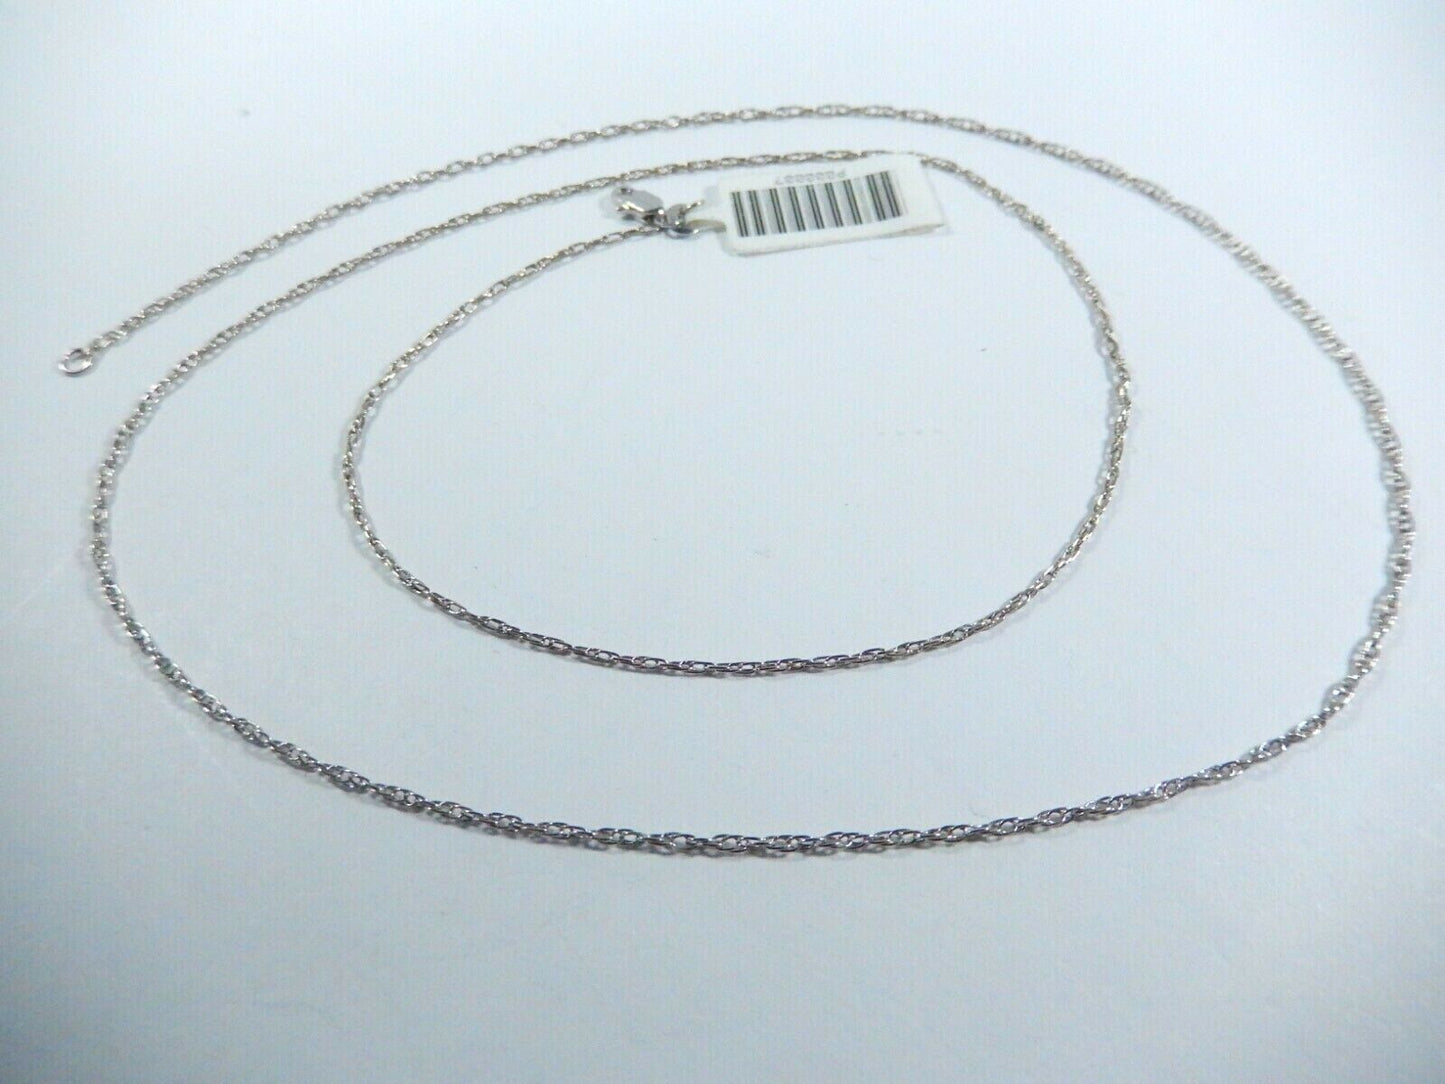 23" 14K White Gold 1.25mm Polished Light Rope Chain